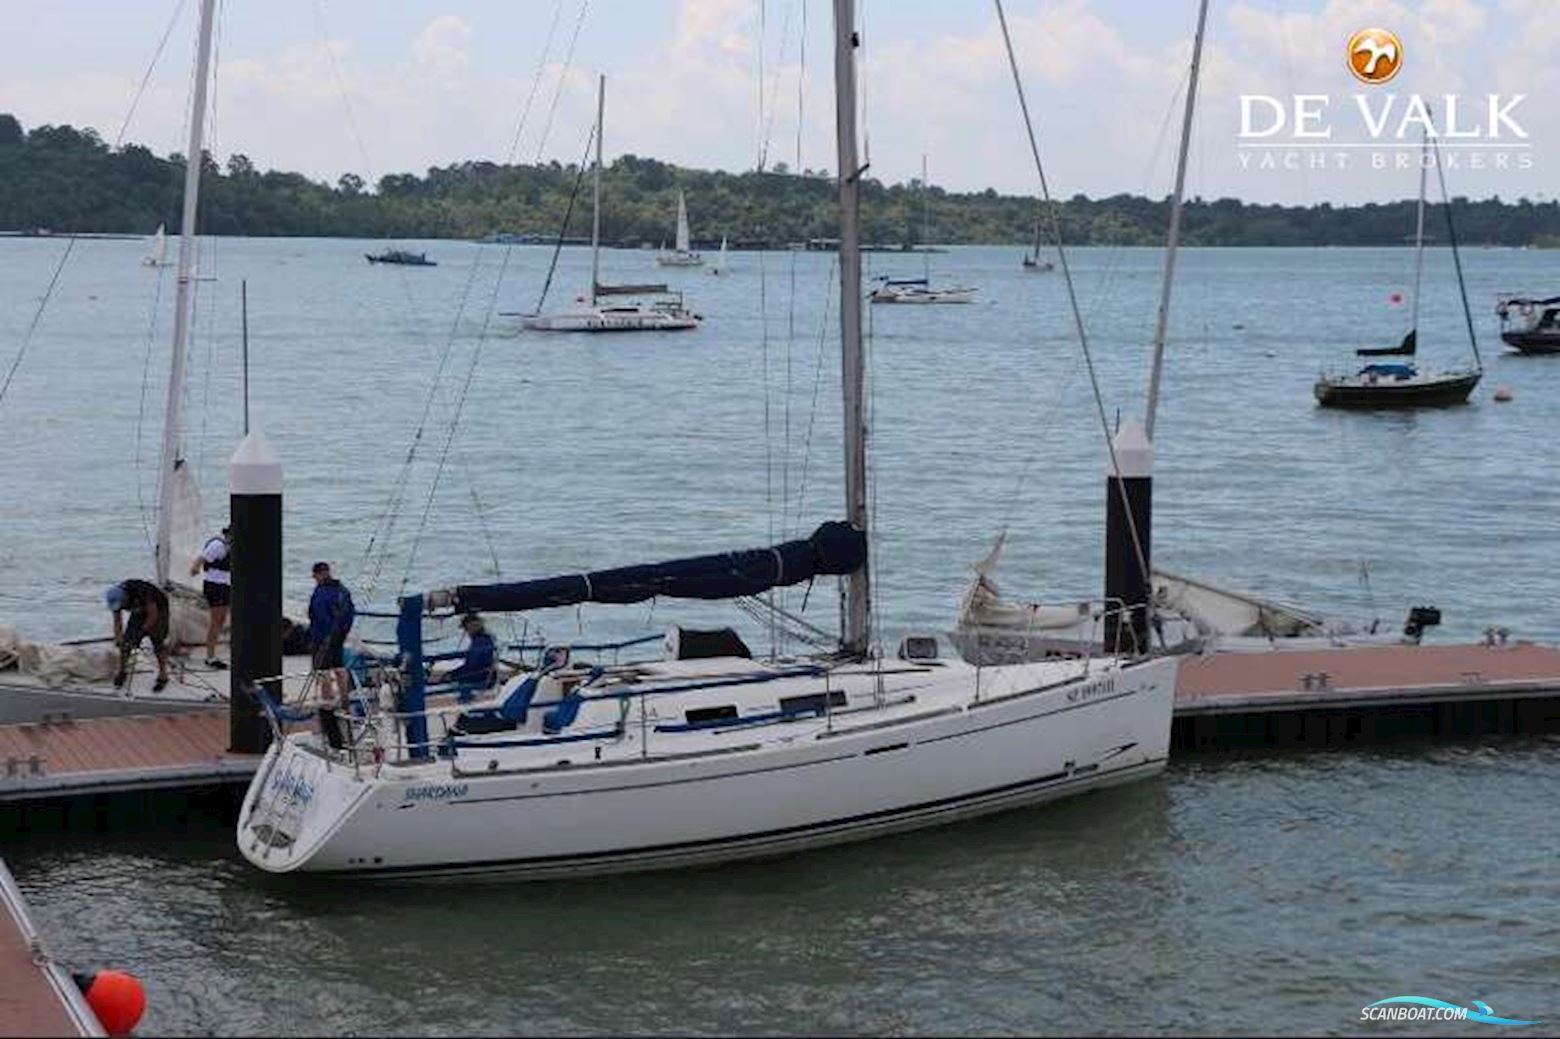 Dufour 34 Performance Sailing boat 2005, with Volvo engine, No country info